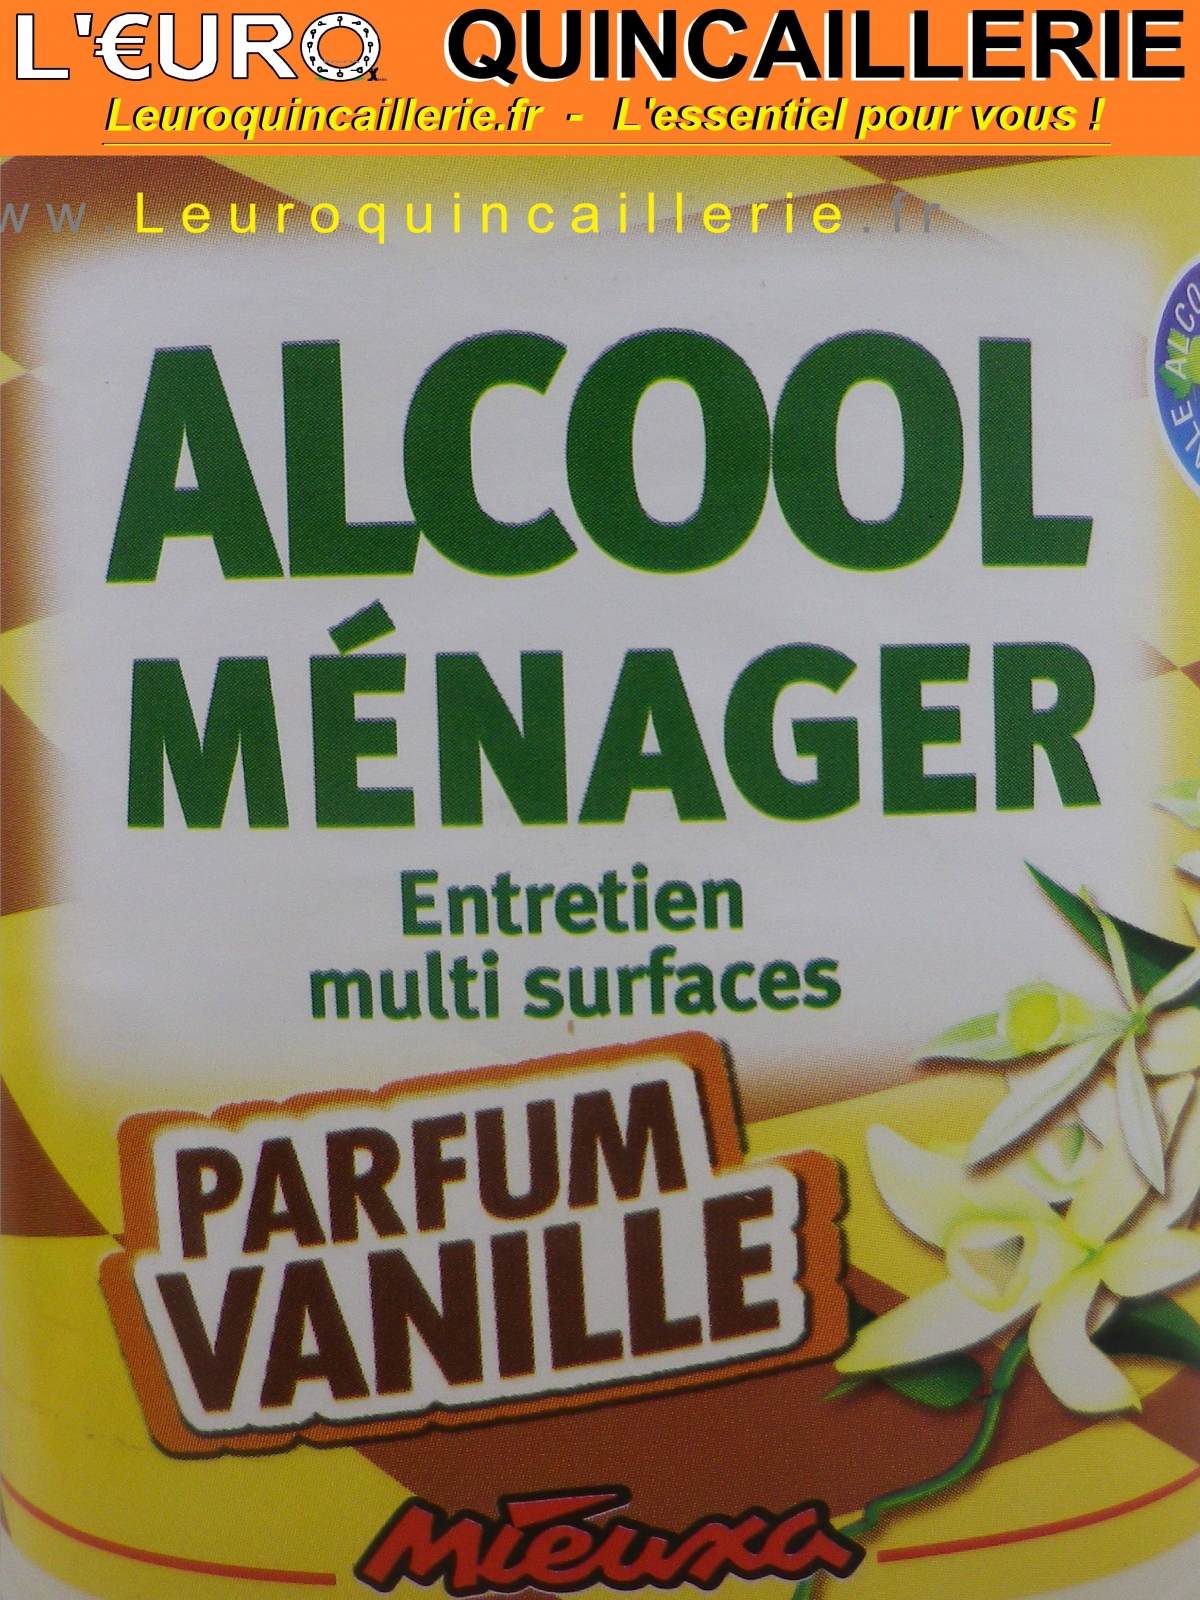 ALCOOL MENAGER VANILLE